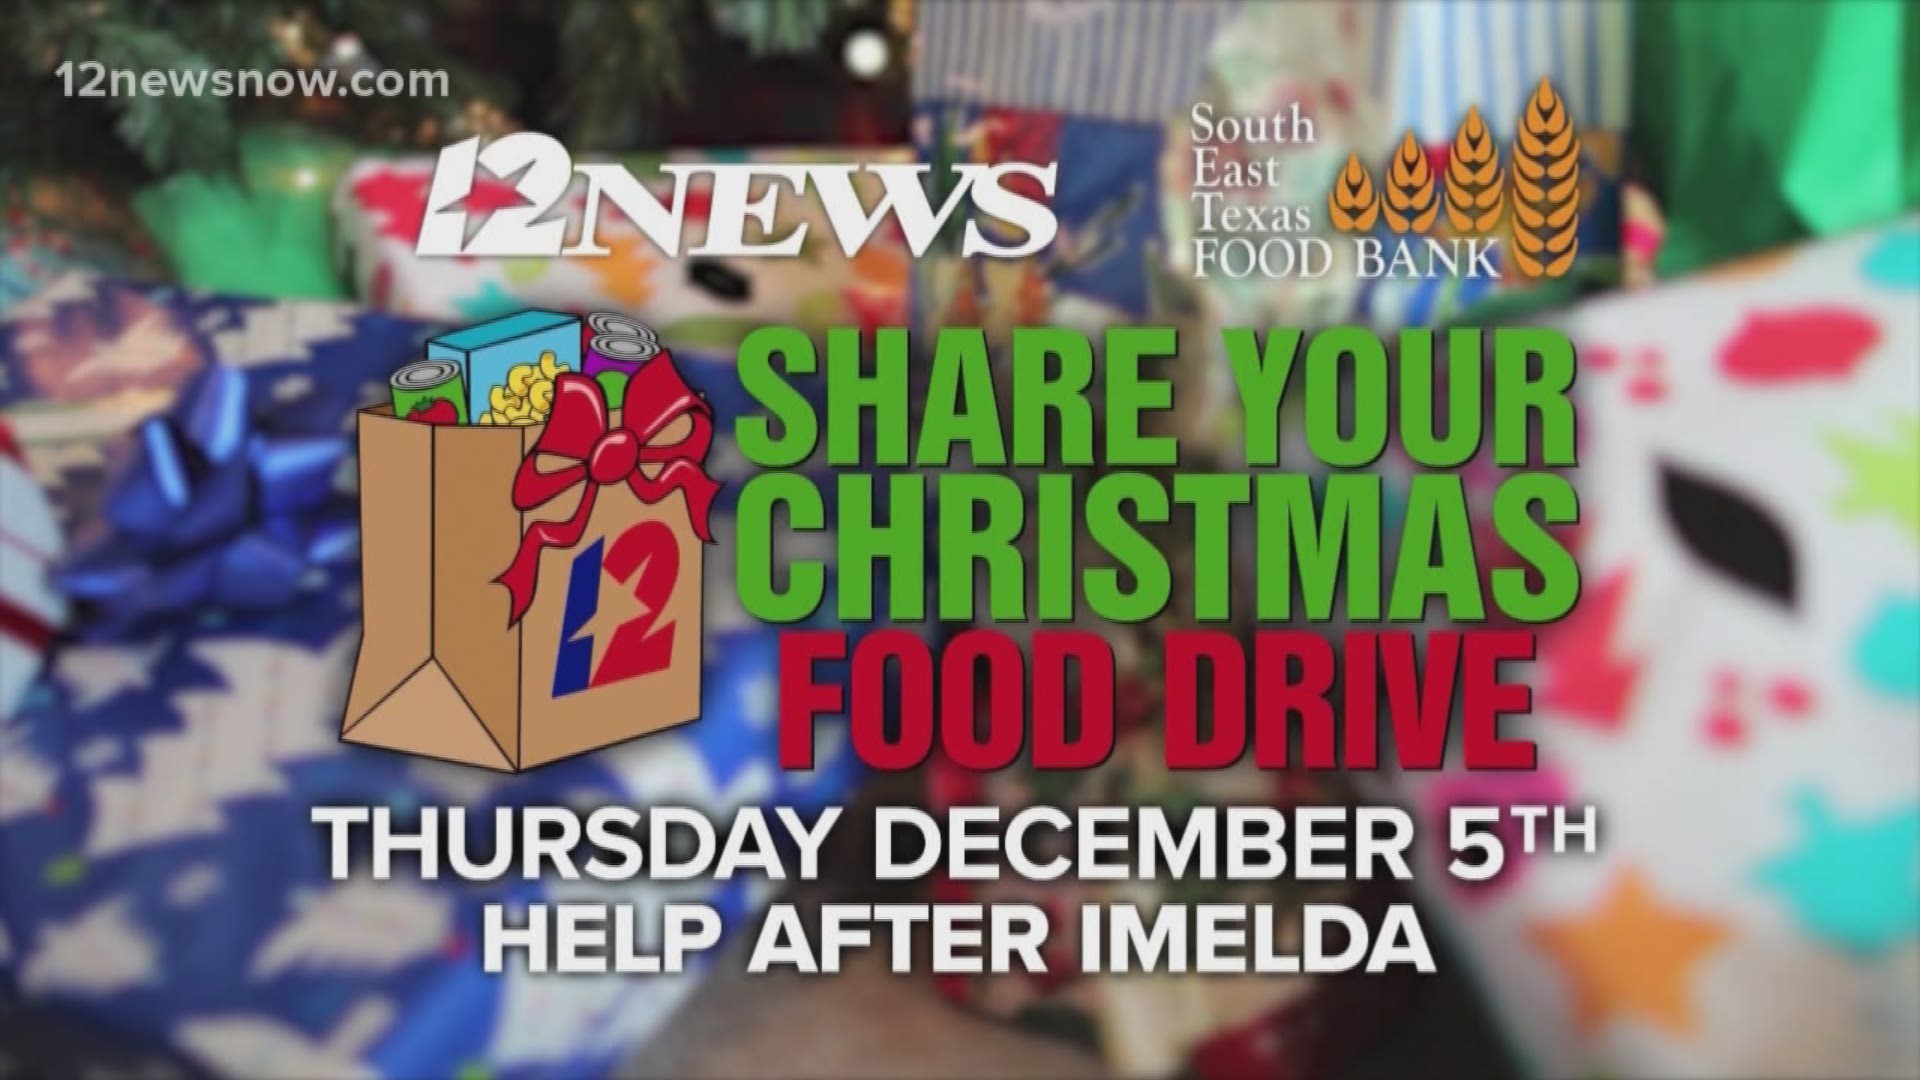 You can drop off non-perishable food at all Southeast Texas H-E-B, Kroger and Market Basket locations as well as Community Bank of Texas branch locations.